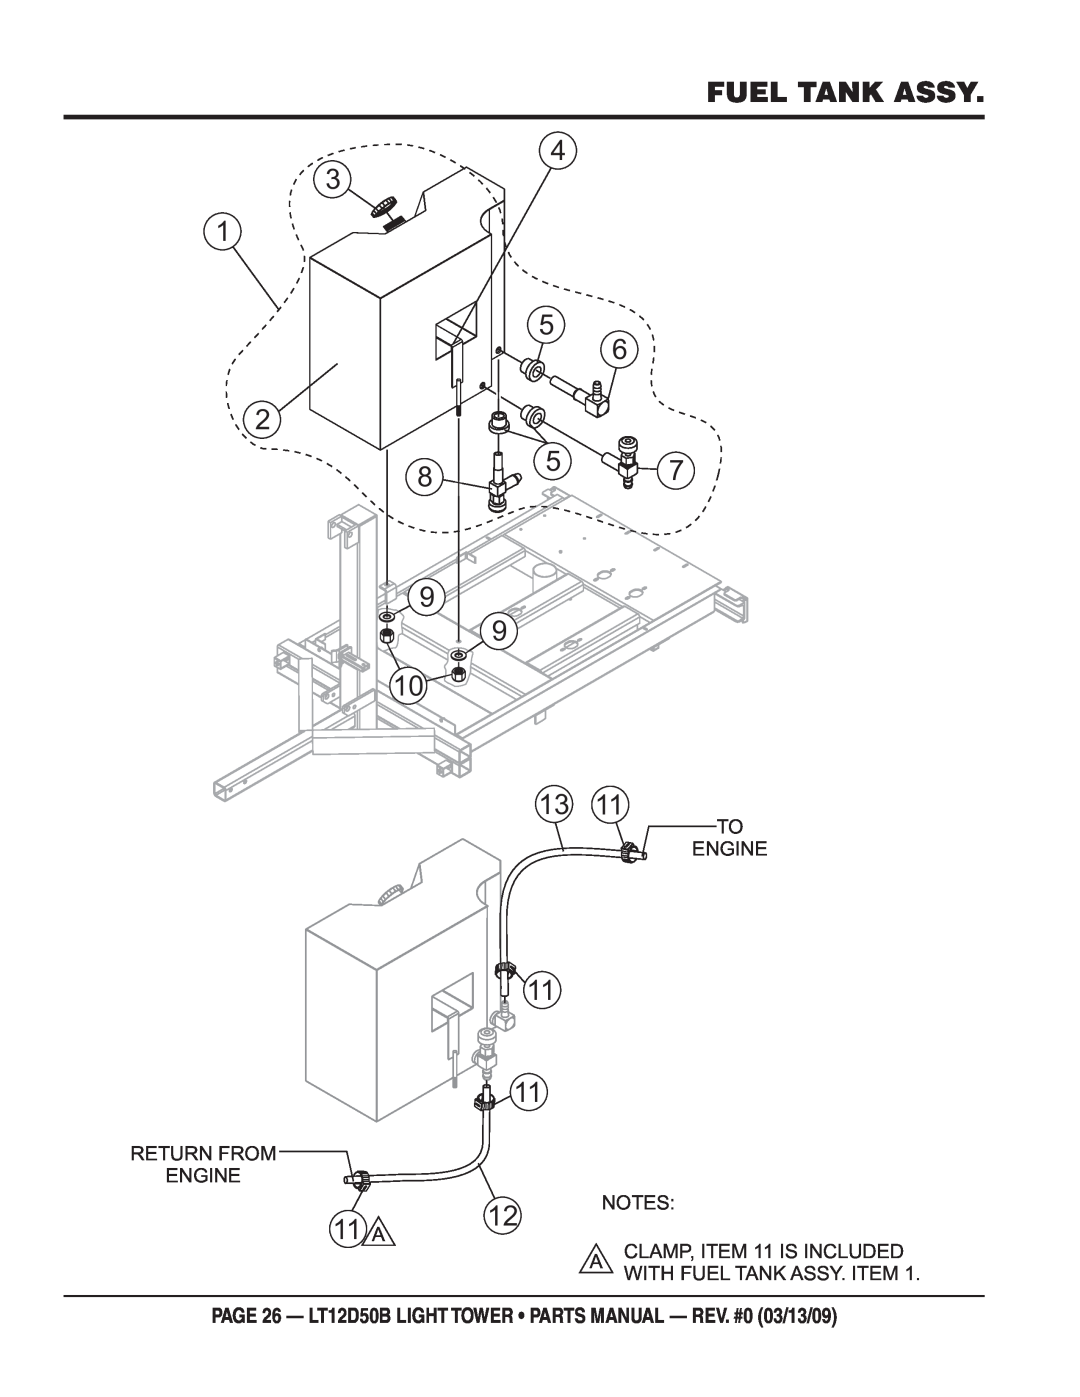 Multiquip Fuel Tank Assy, PAGE 26 - LT12D50B LIGHT TOWER PARTS MANUAL - REV. #0 03/13/09, To Engine, Return From Engine 